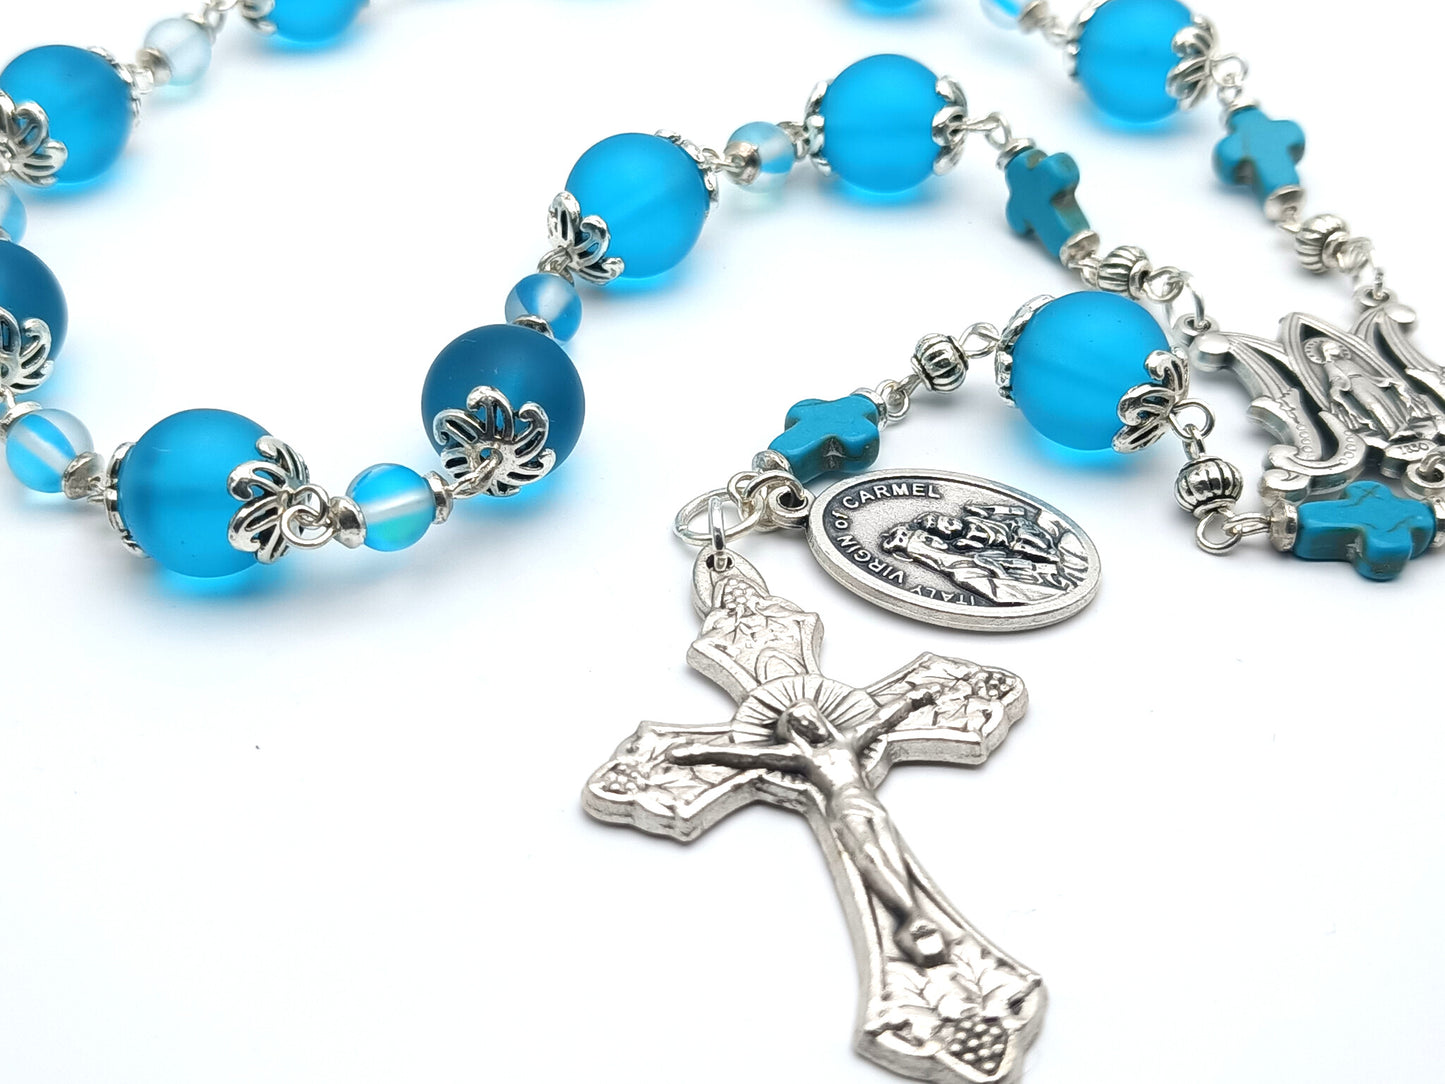 Our Lady of Mount Carmel unique rosary beads single decade with blue glass beads, silver miraculous medal centre medal, vine leaves crucifix and Our Lady of Mount Carmel medal.